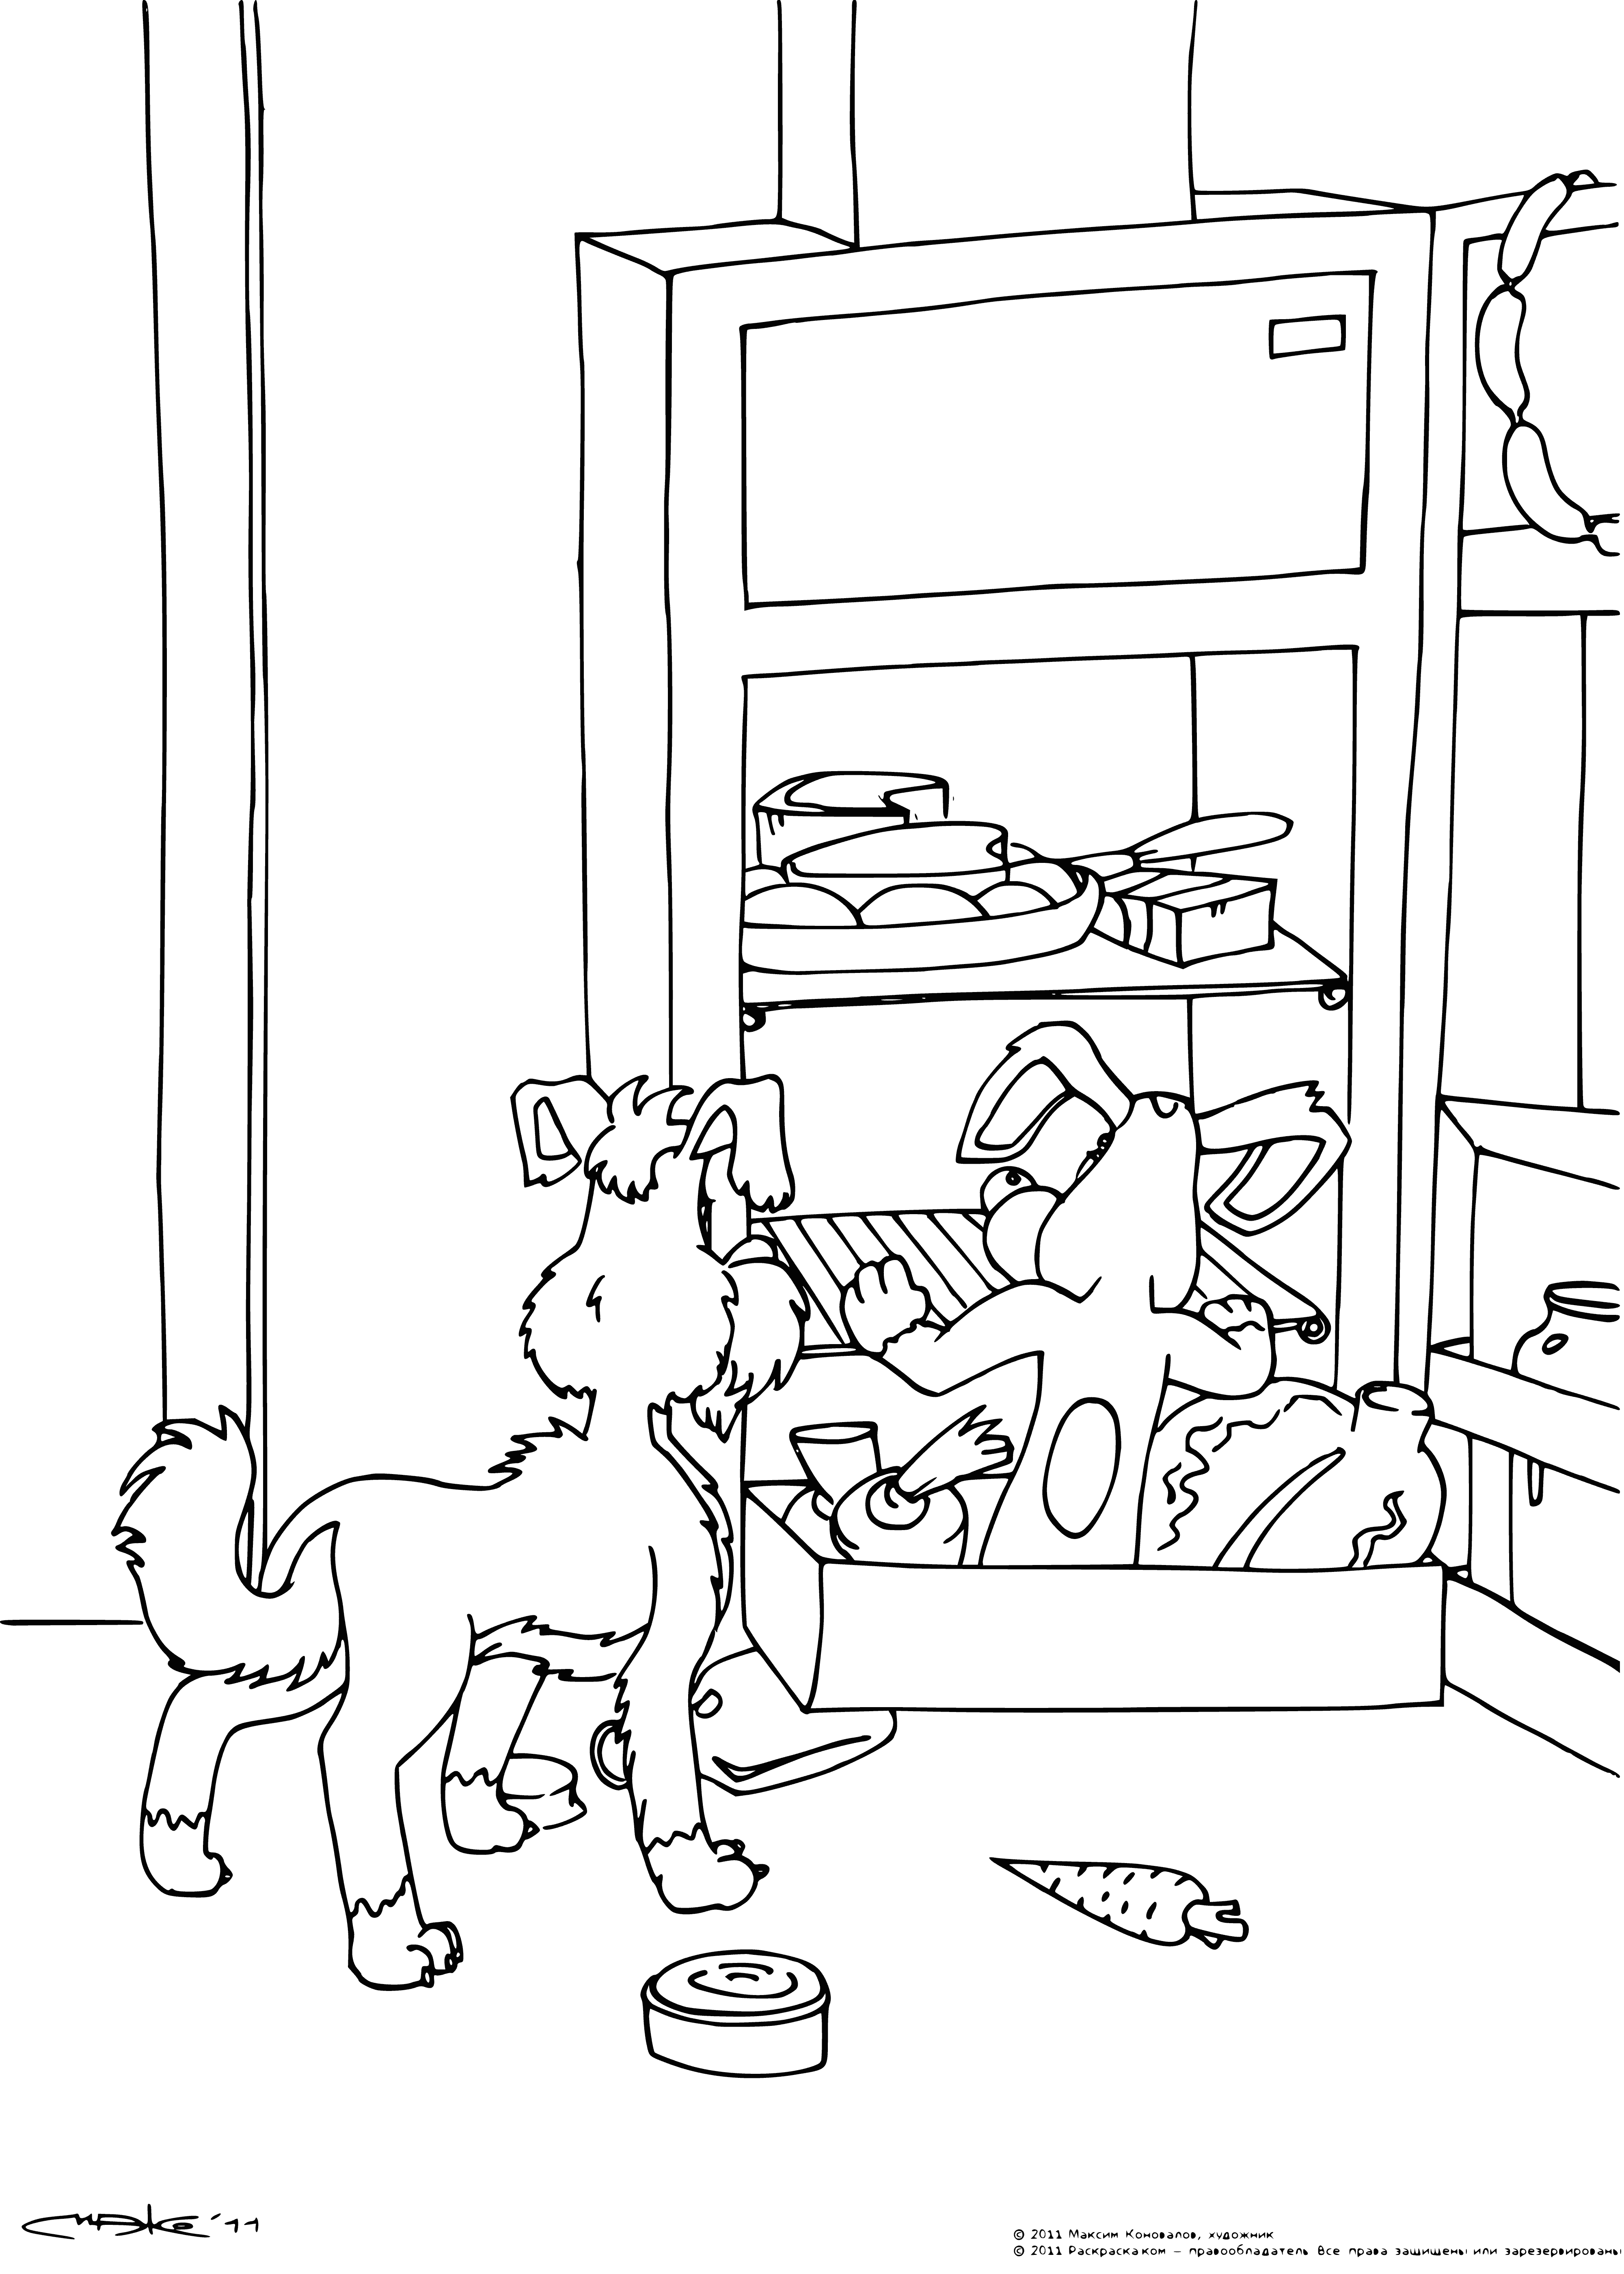 coloring page: Bobik the dog visits Barbos, who has a fridge that fascinates him. #cuteanimals